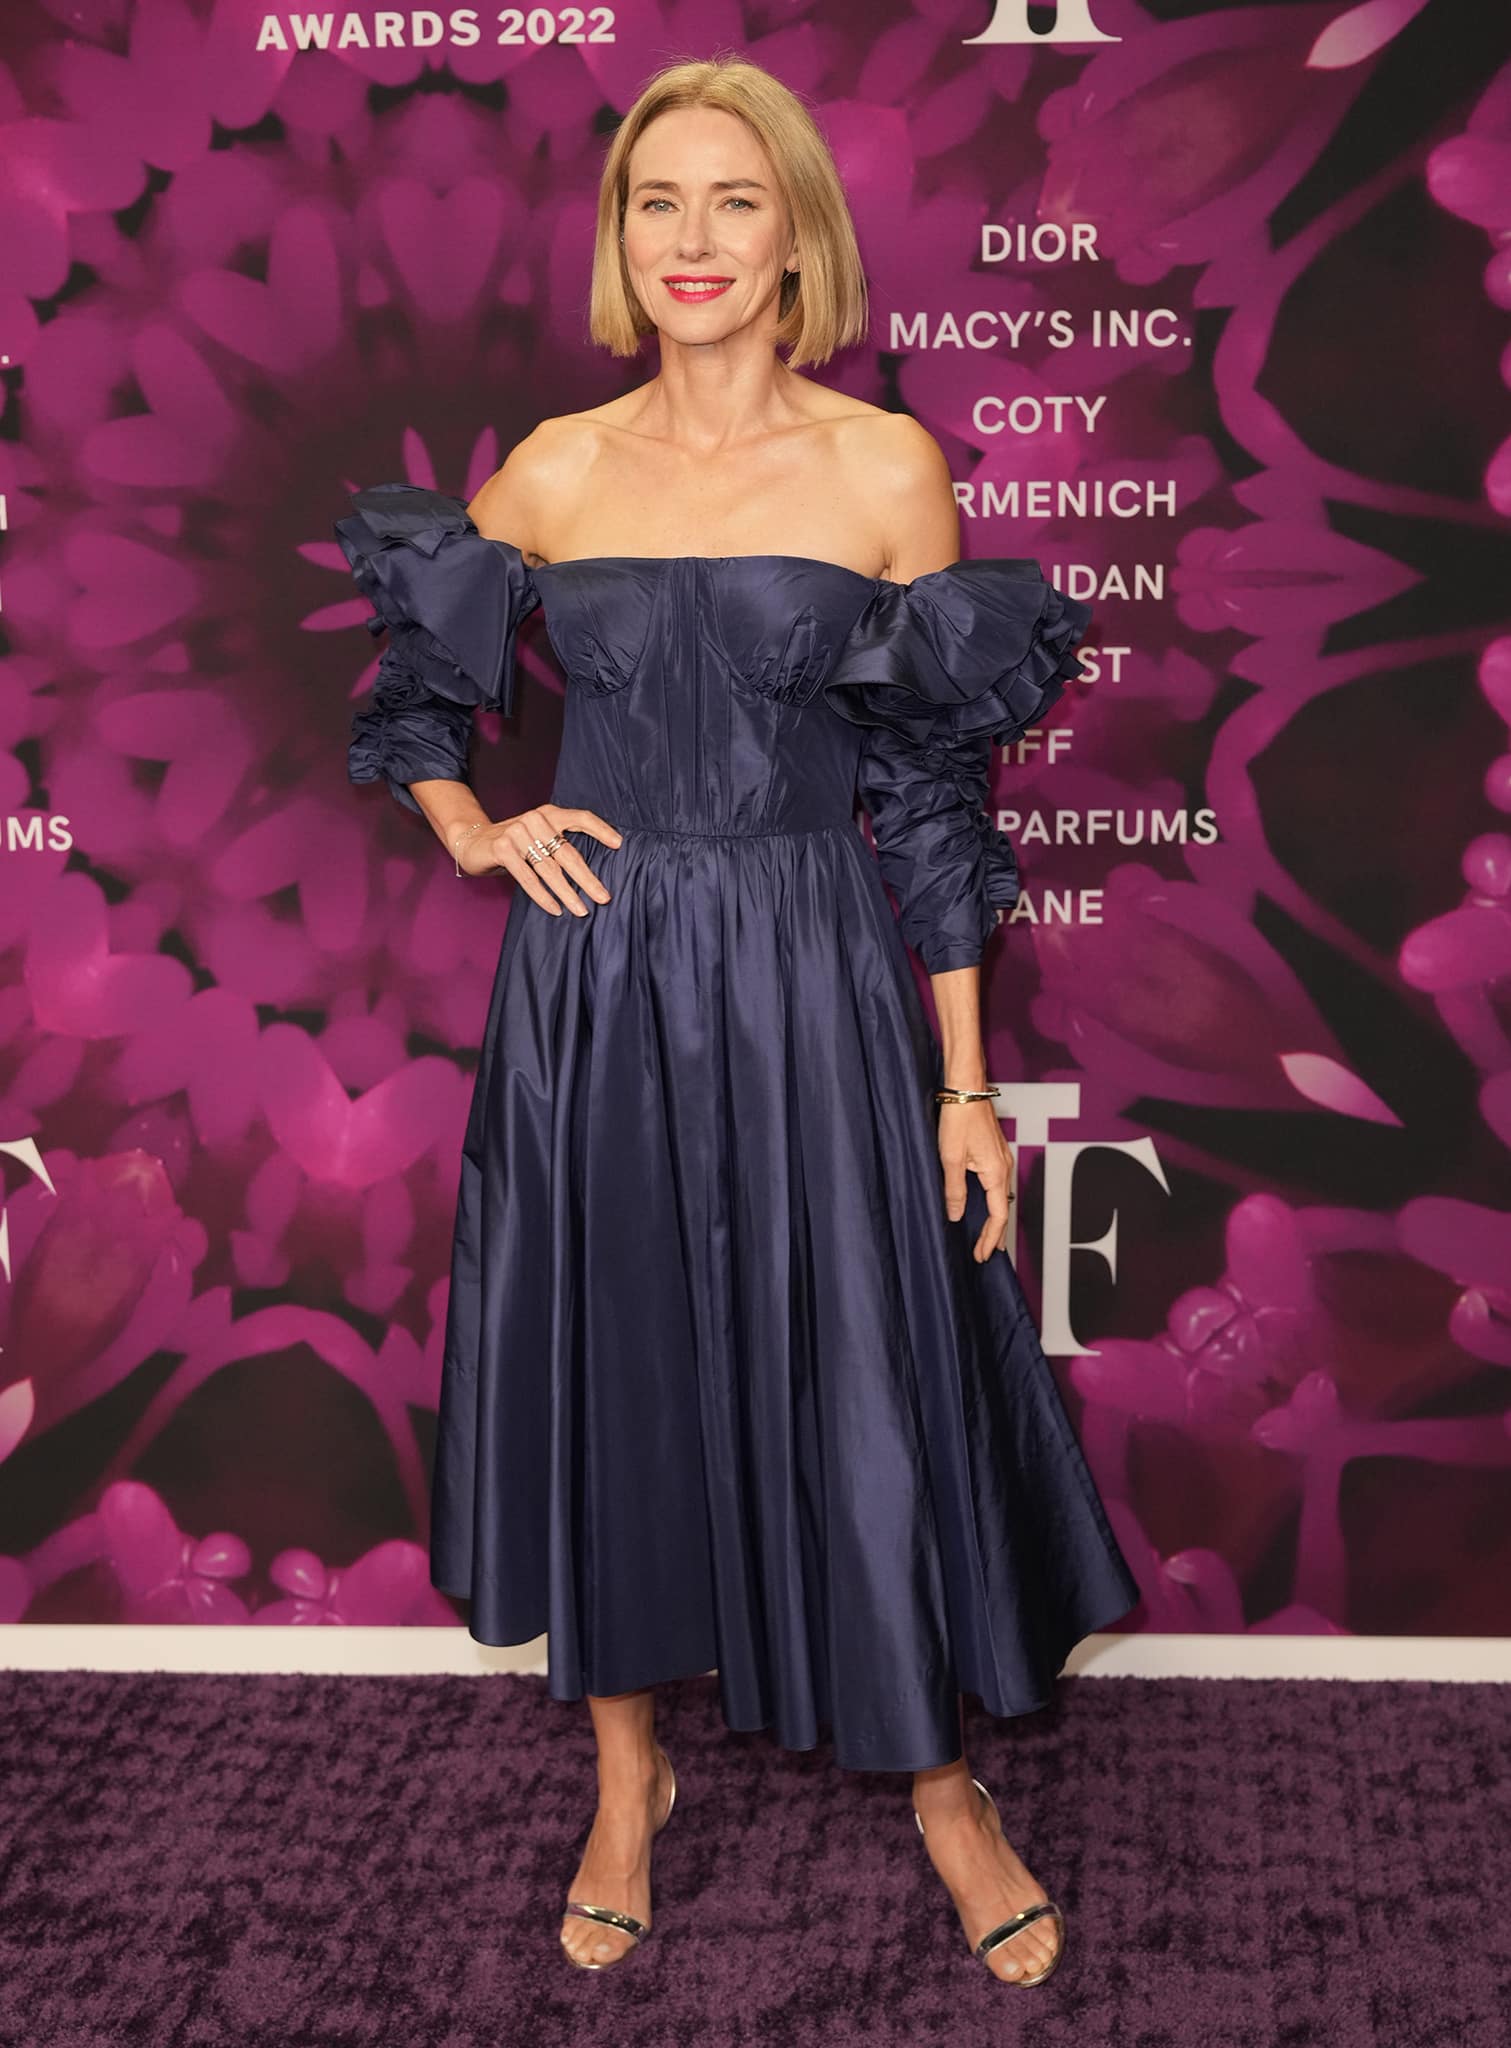 Naomi Watts Attends The Fragrance Foundation Awards In An Off-The-Shoulder Dress By Jason Wu